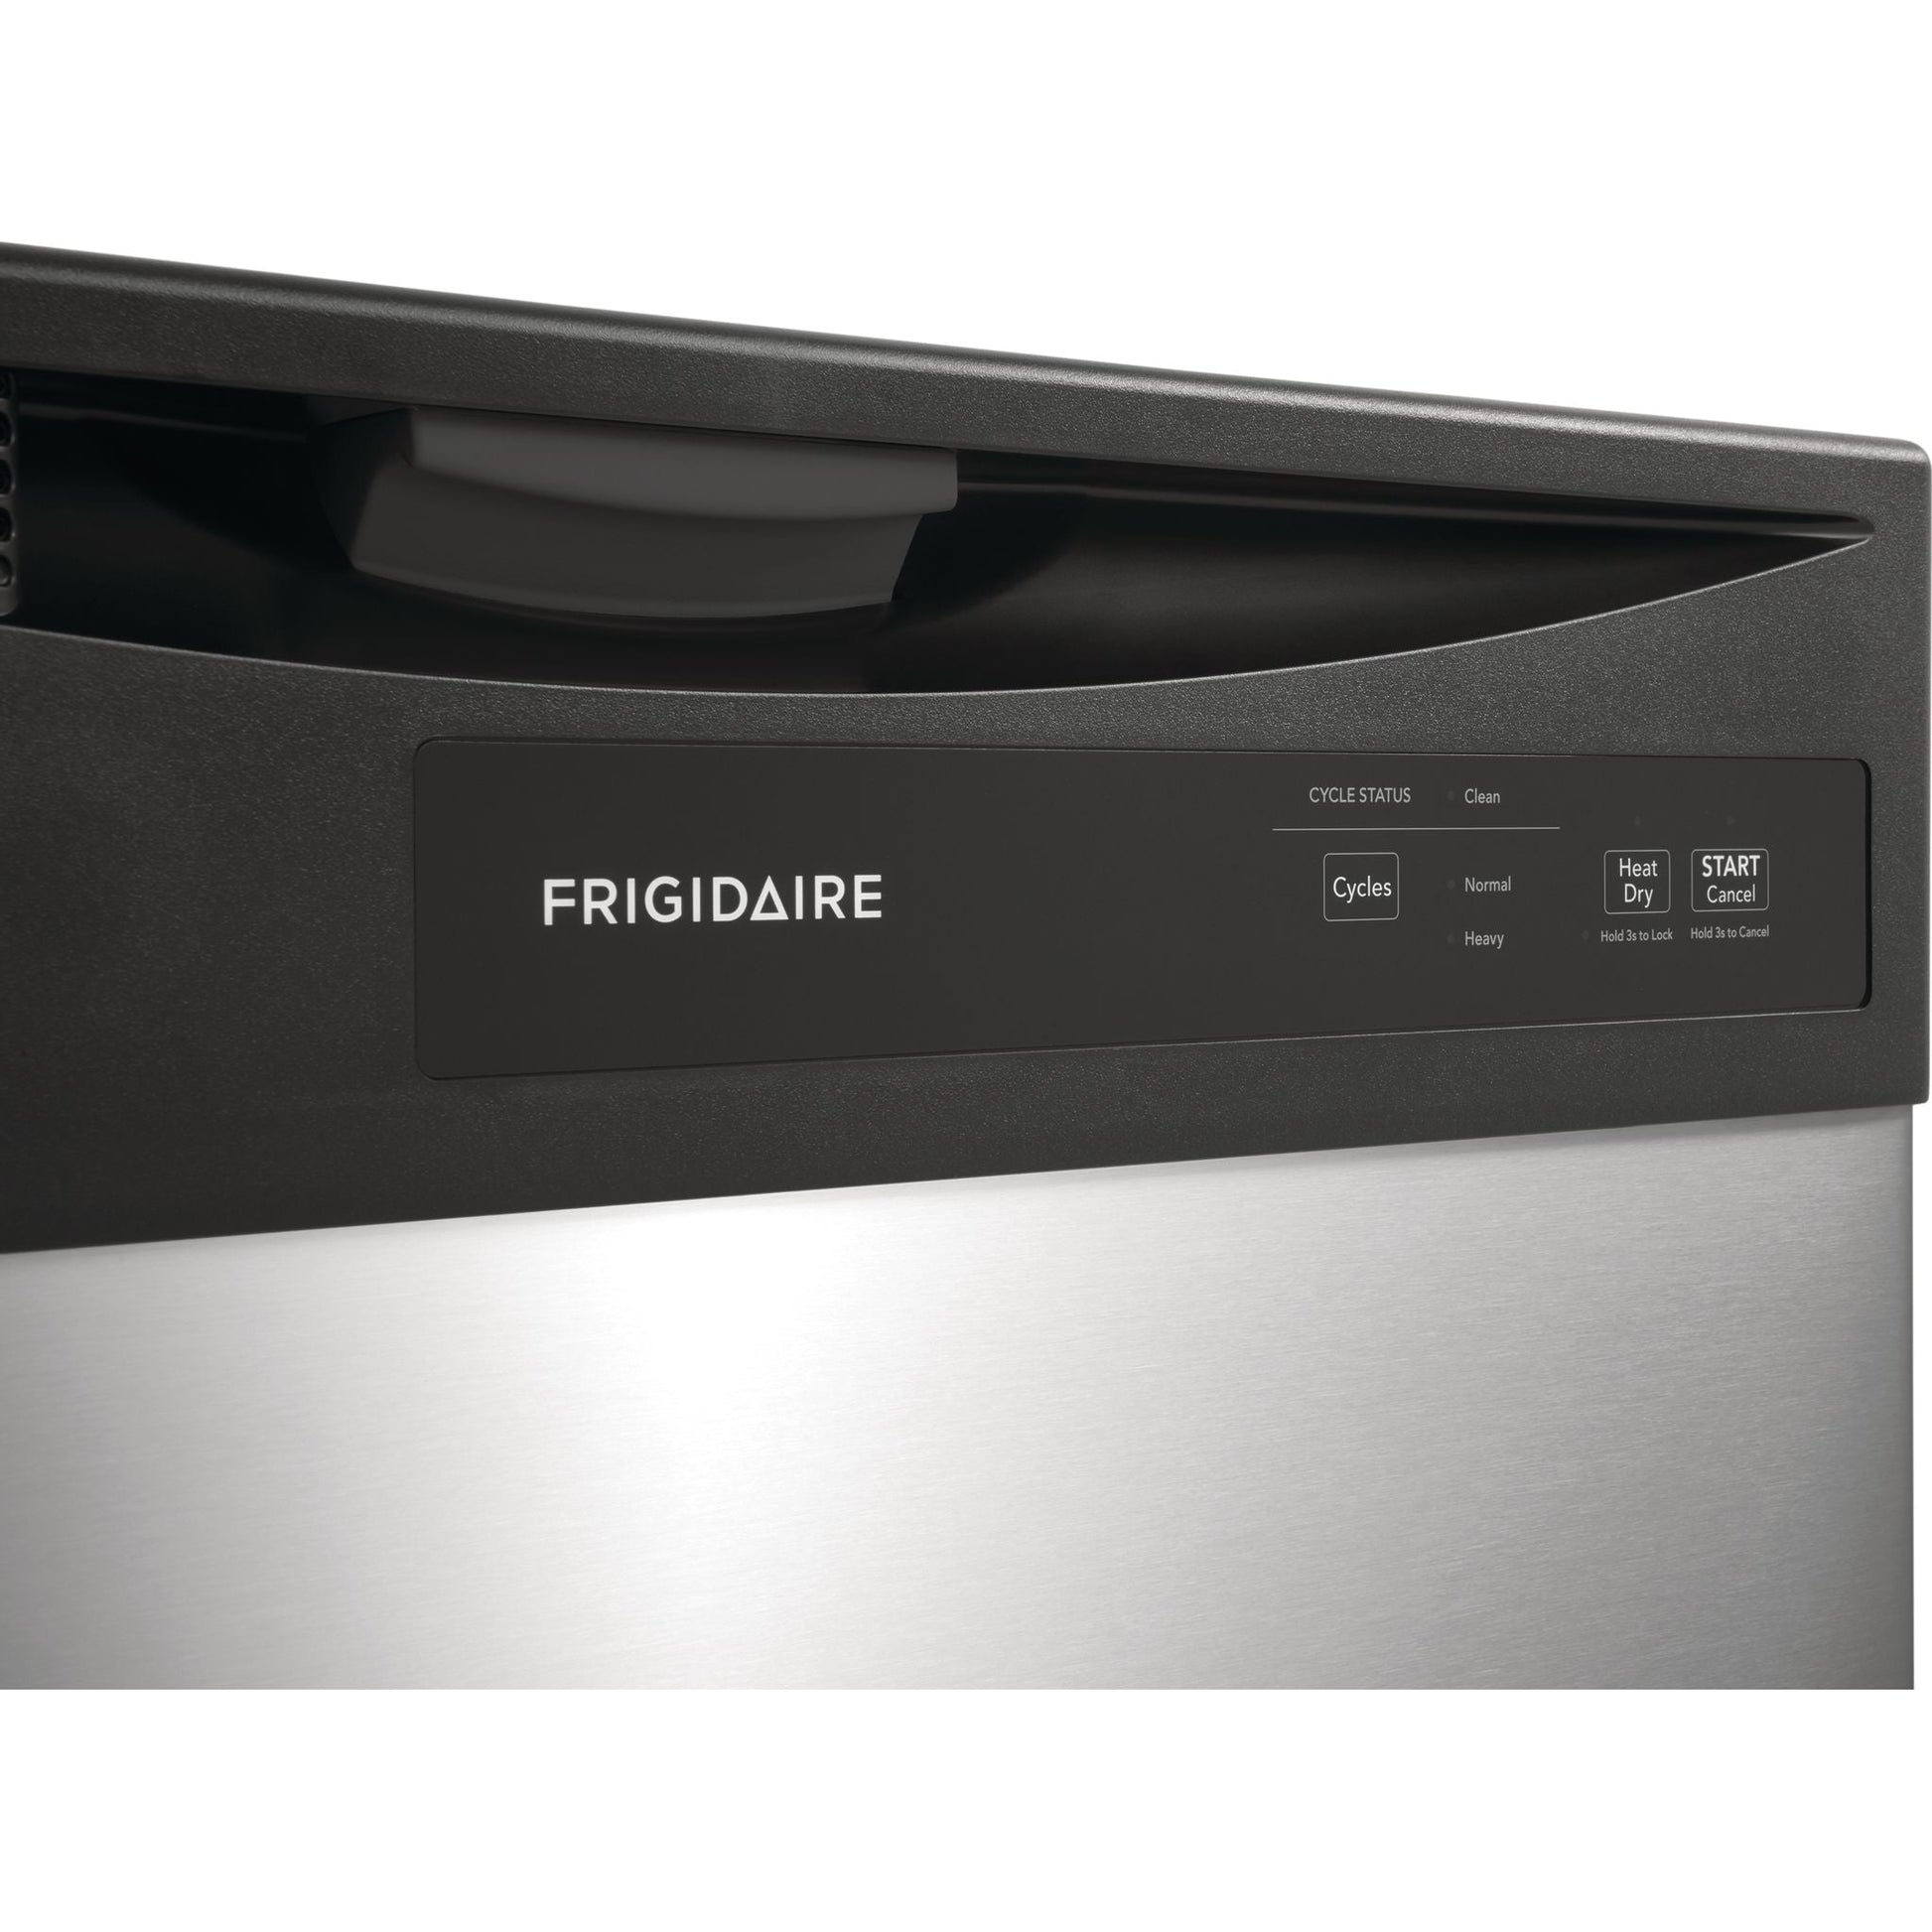 Frigidaire Dishwasher Plastic Tub (FDPC4221AS) - Stainless Steel